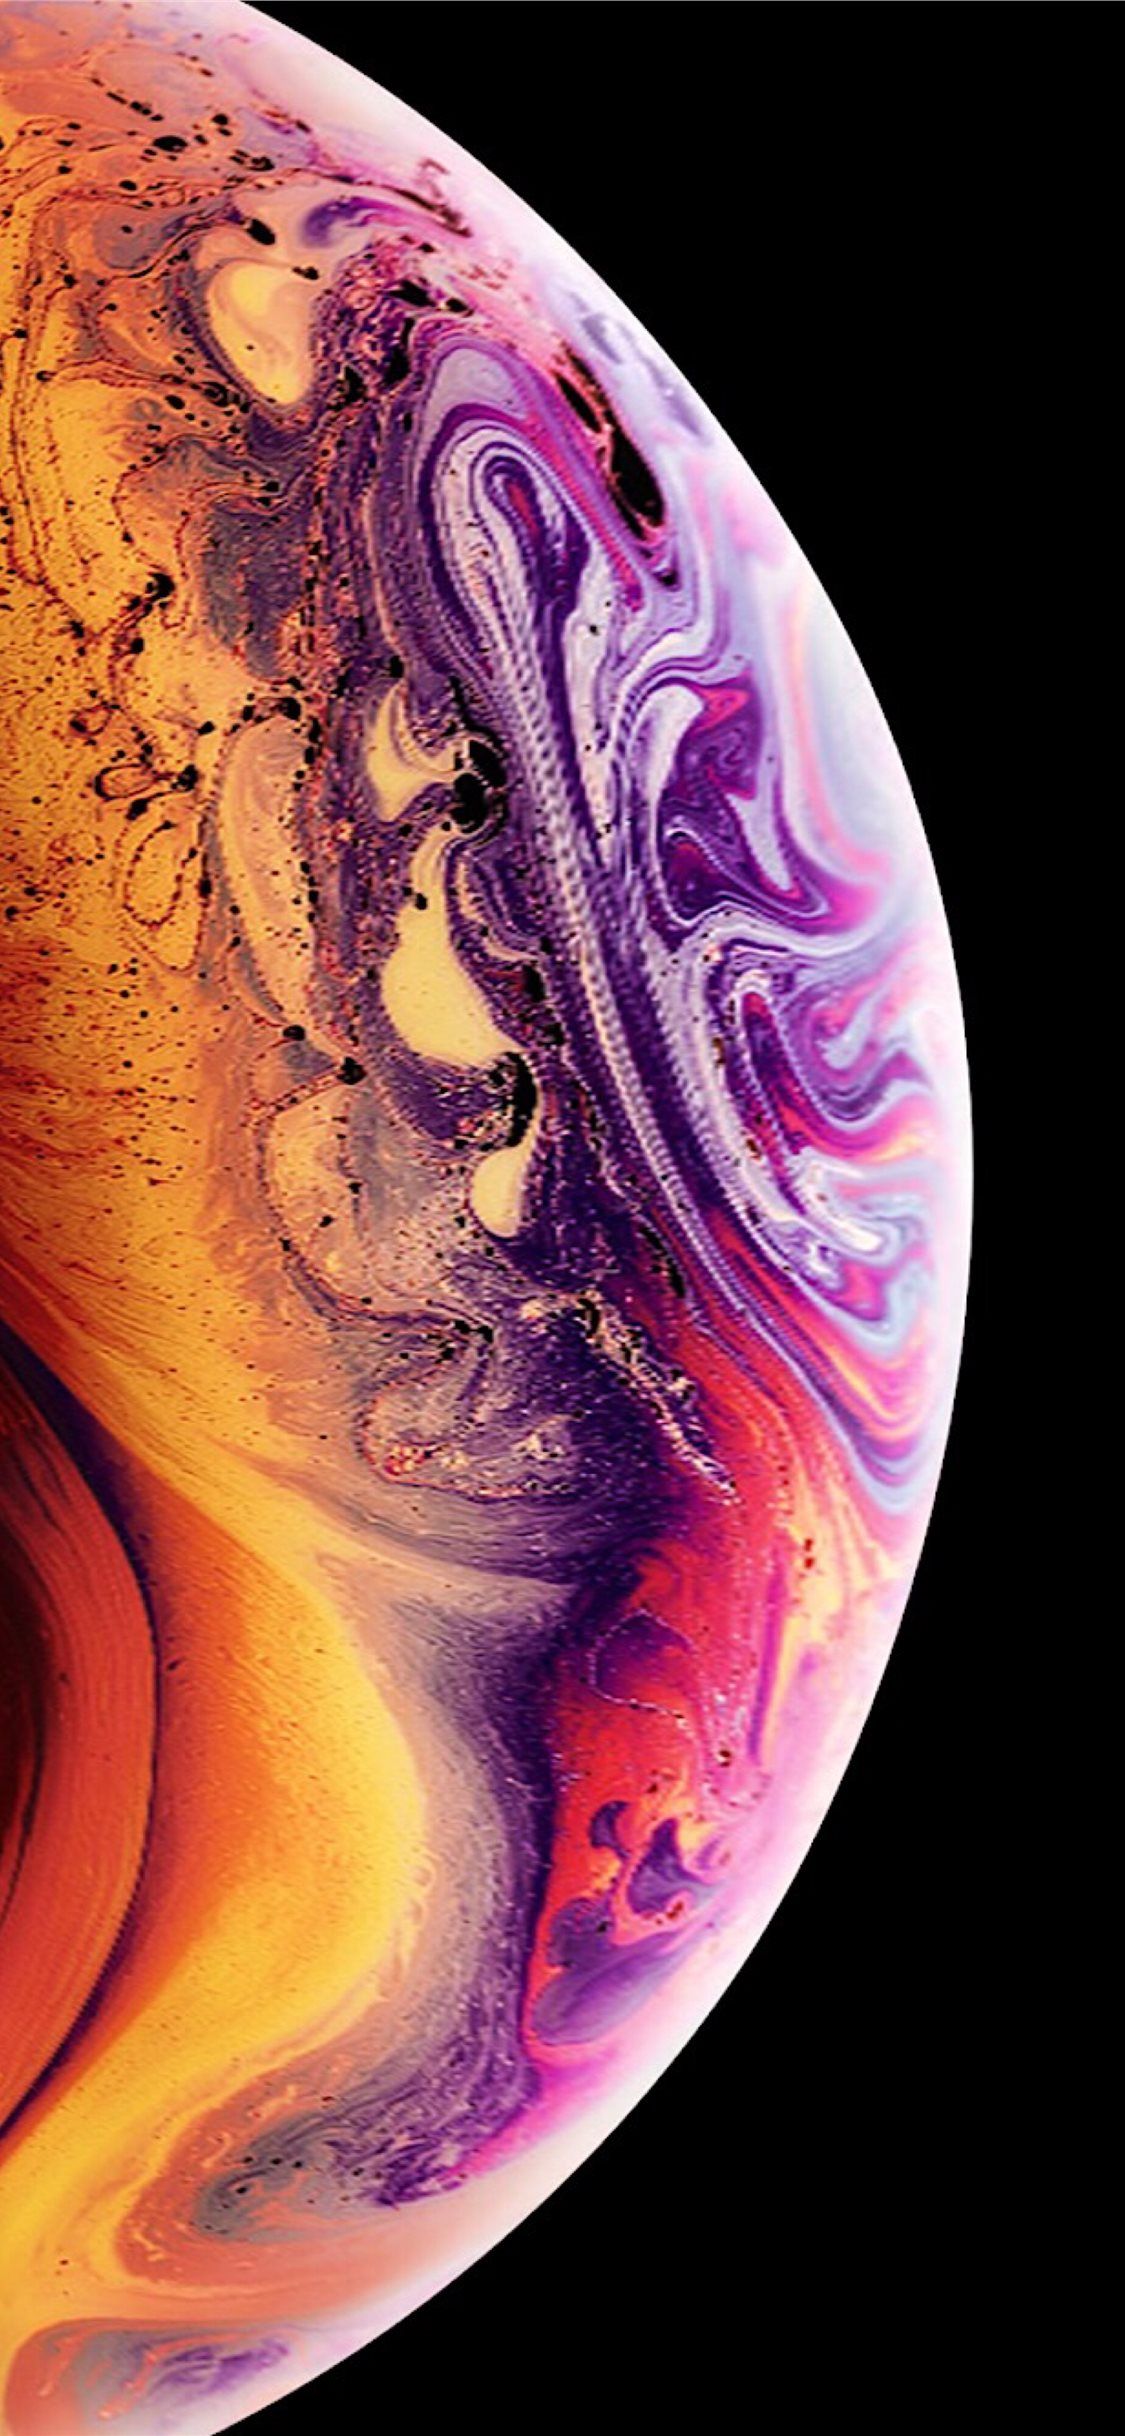 iPhone 11 and iPhone 11 Pro Wallpapers